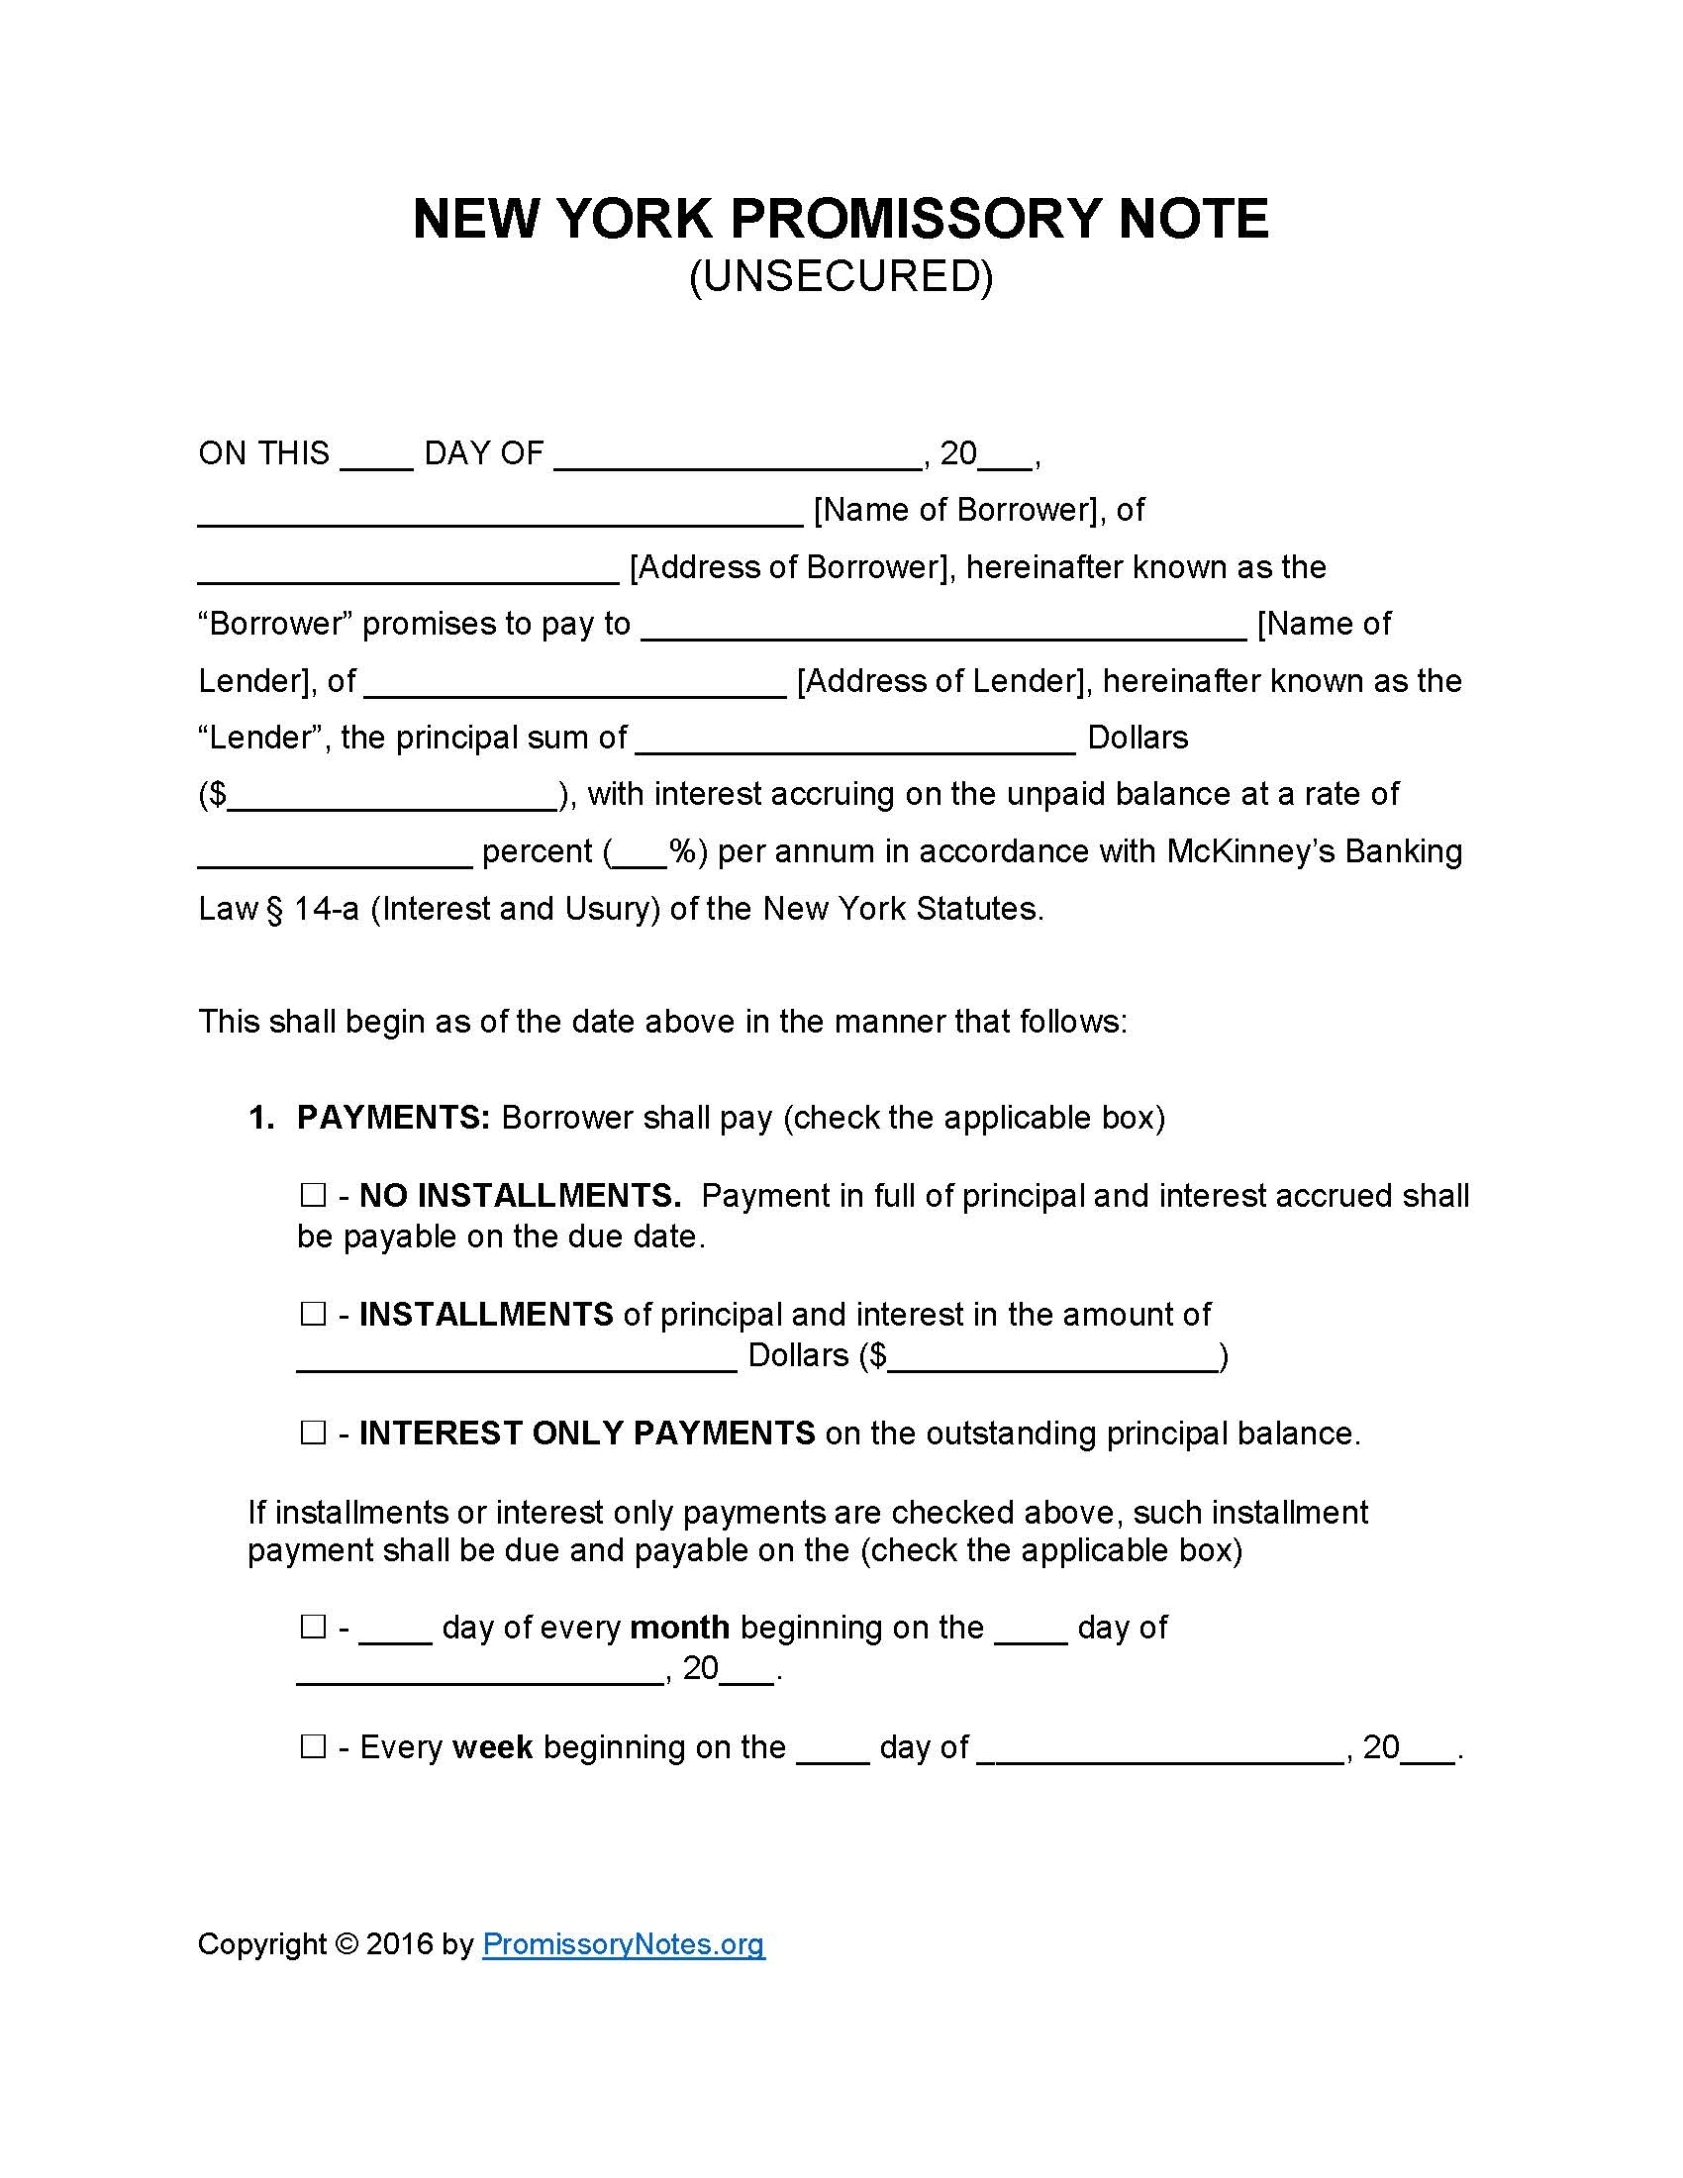 New York Unsecured Promissory Note Template - Promissory Notes in Promissory Note Template Free Download